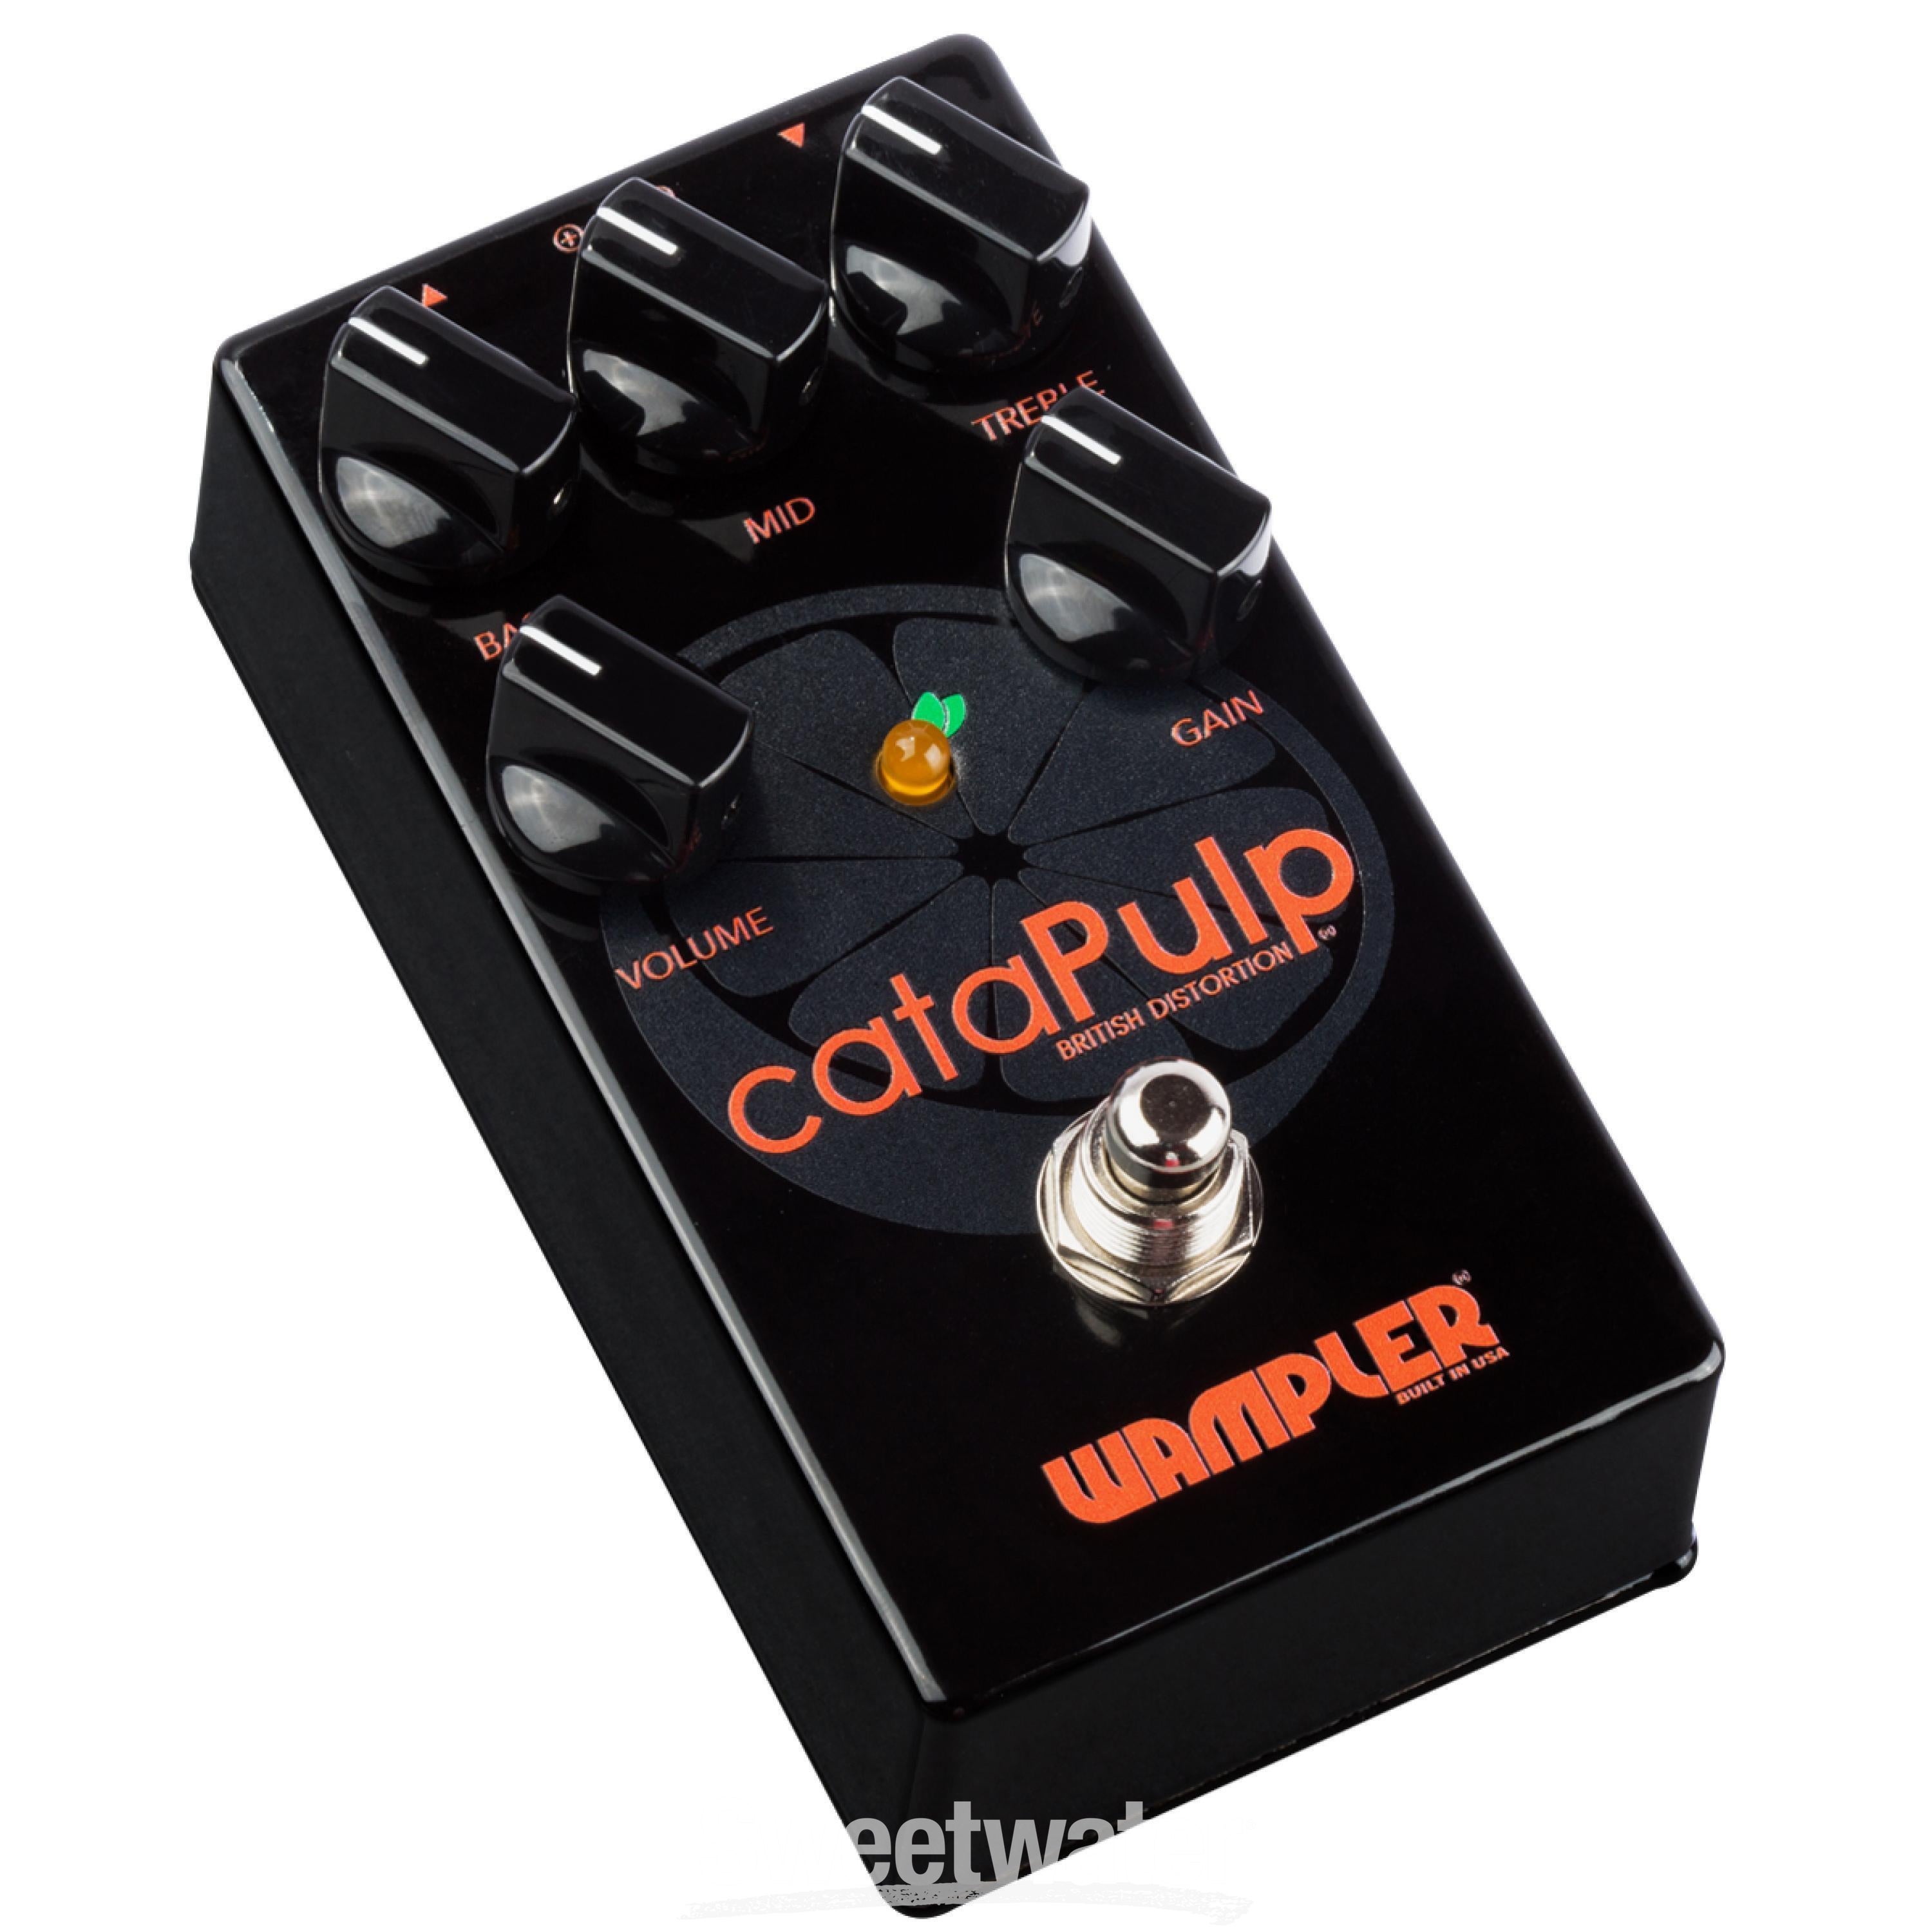 Wampler cataPulp British Distortion Pedal Reviews | Sweetwater